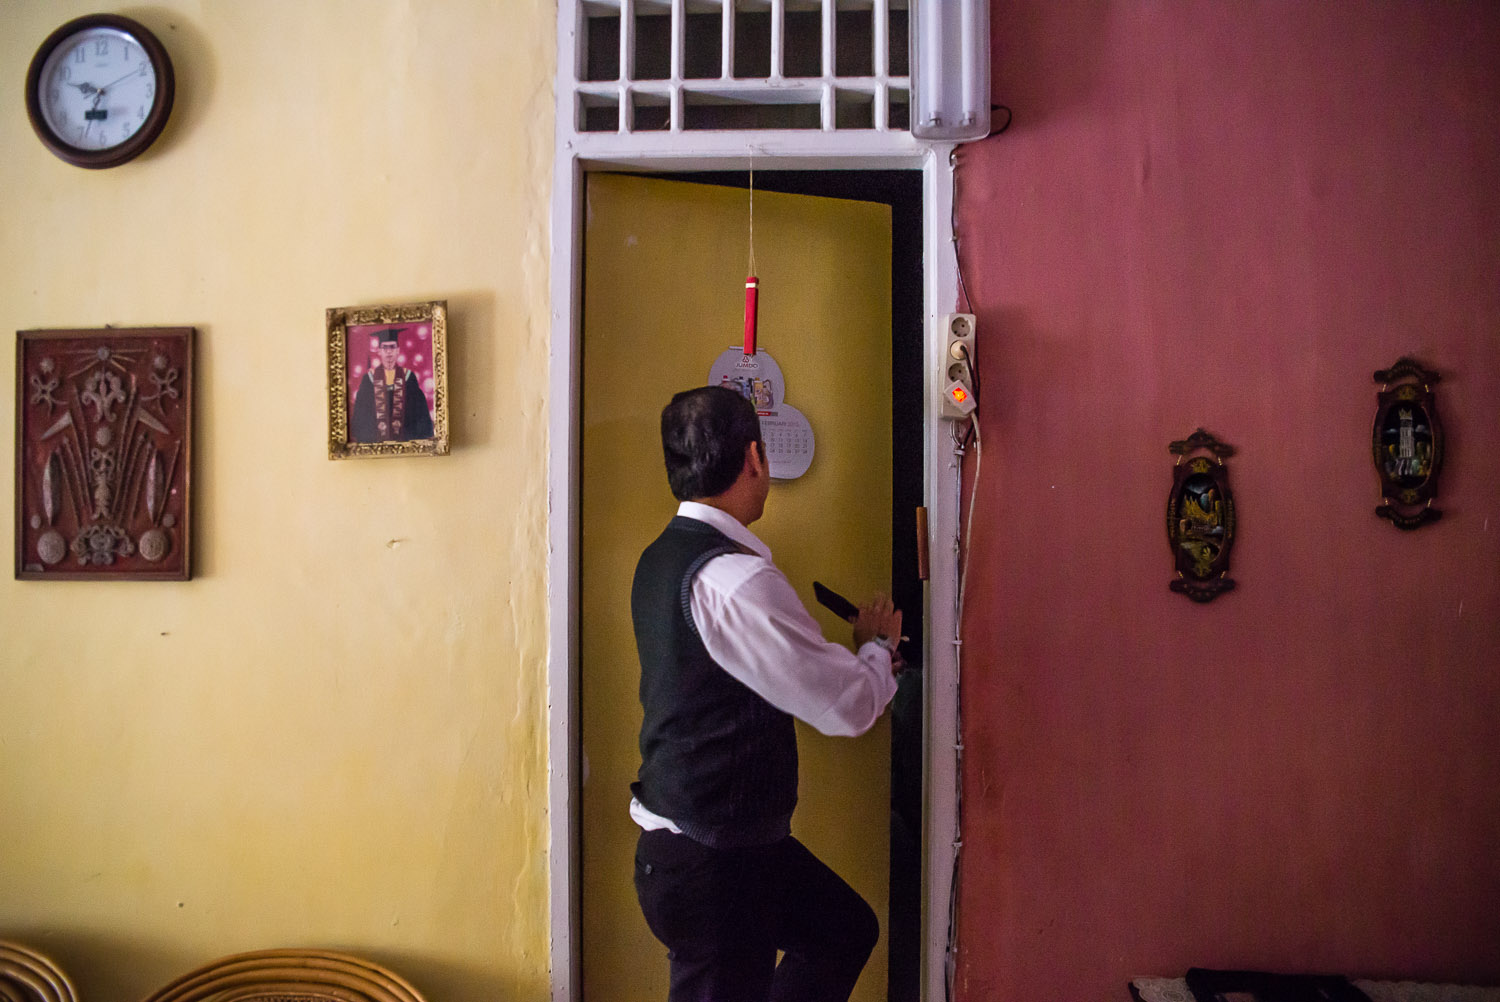   Benjamin Meijer Verbrugge (Benny), the leader of the United Indonesian Jewish Community, leads the way into his home synagogue in Lampung, Sumatra. "This door marks where Kosher begins. My house, it can't always be Kosher. But inside the synagogue 